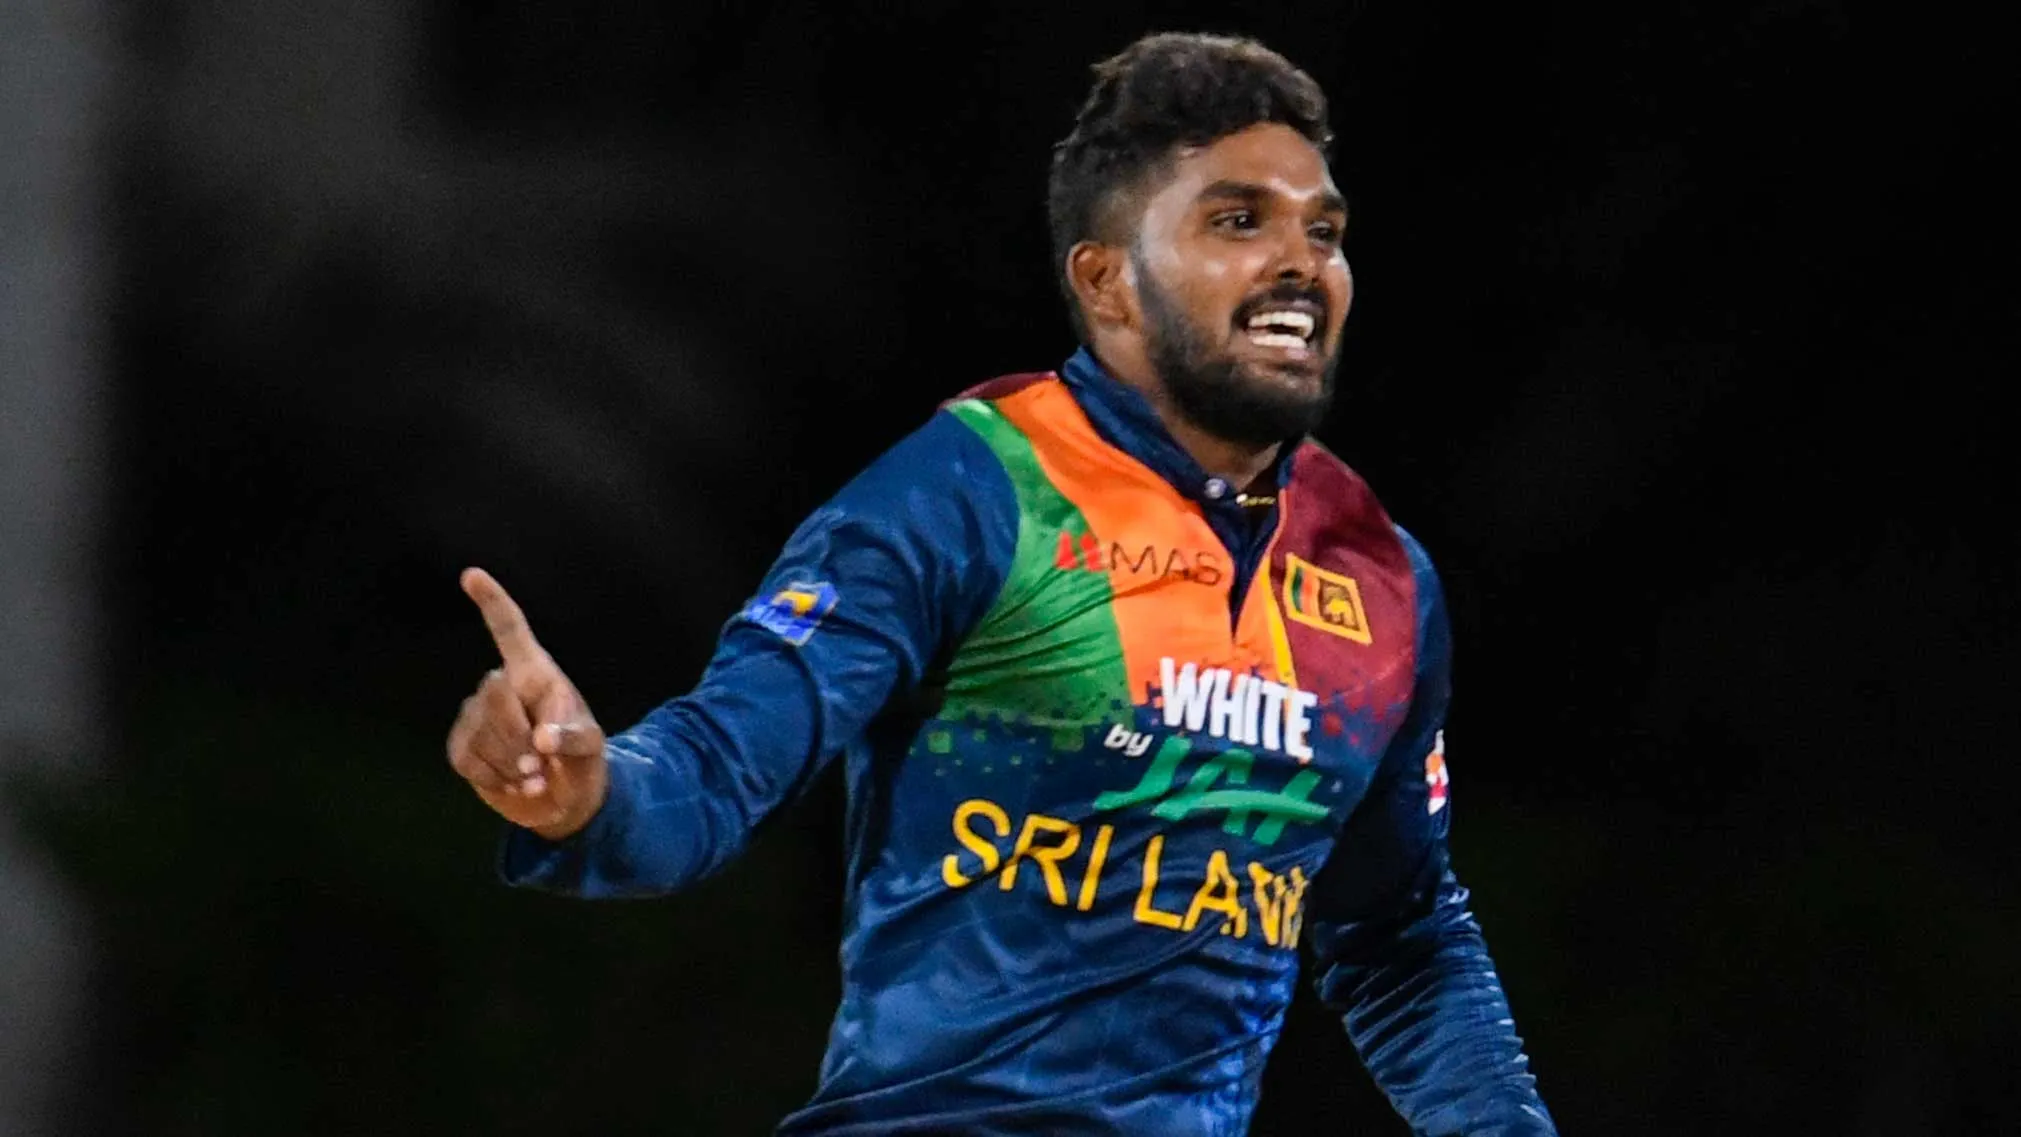 Wanindu Hasaranga ruled out of the T20I series against India | SportzPoint.com